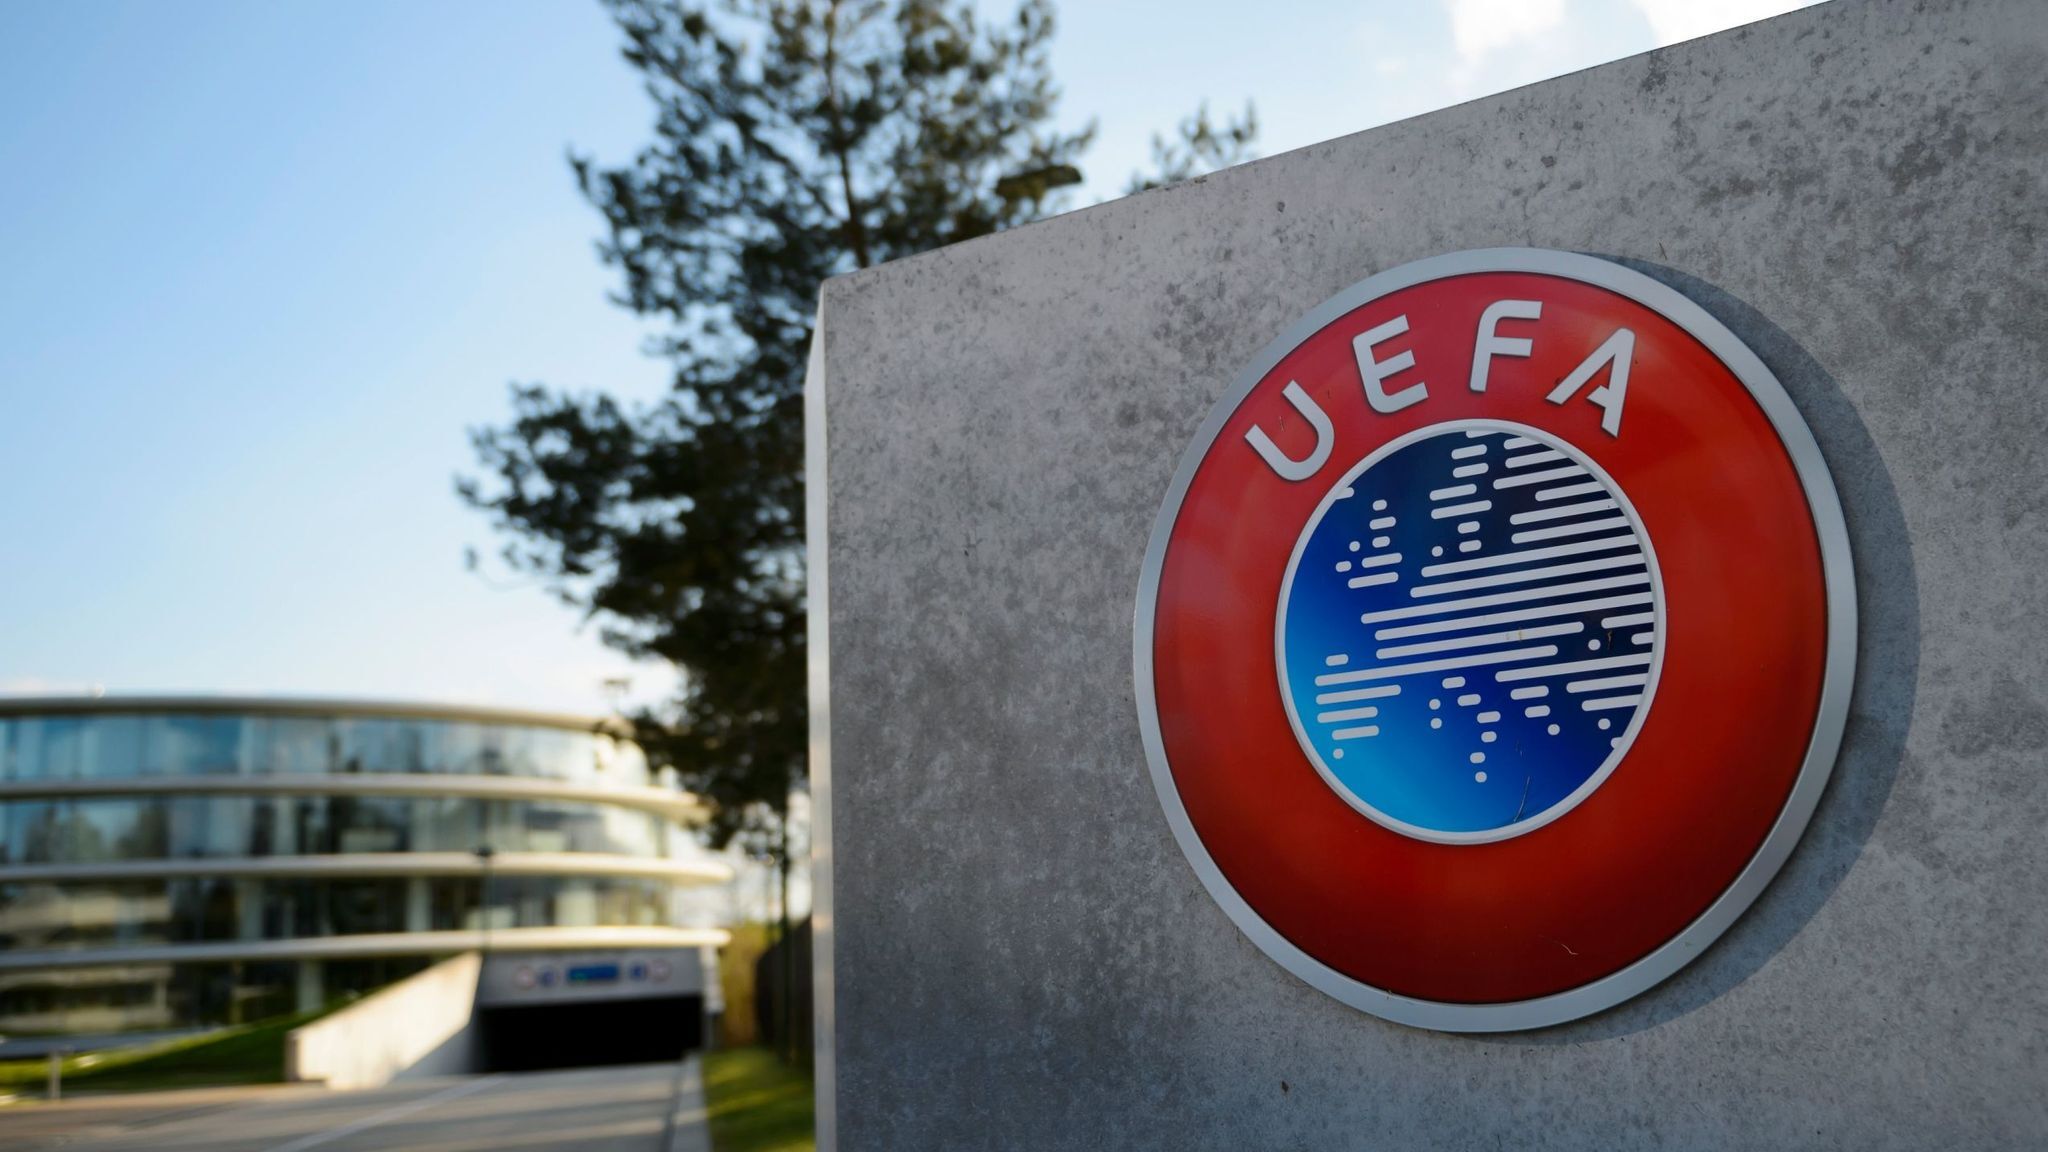 UEFA to share the control of Champions League with clubs